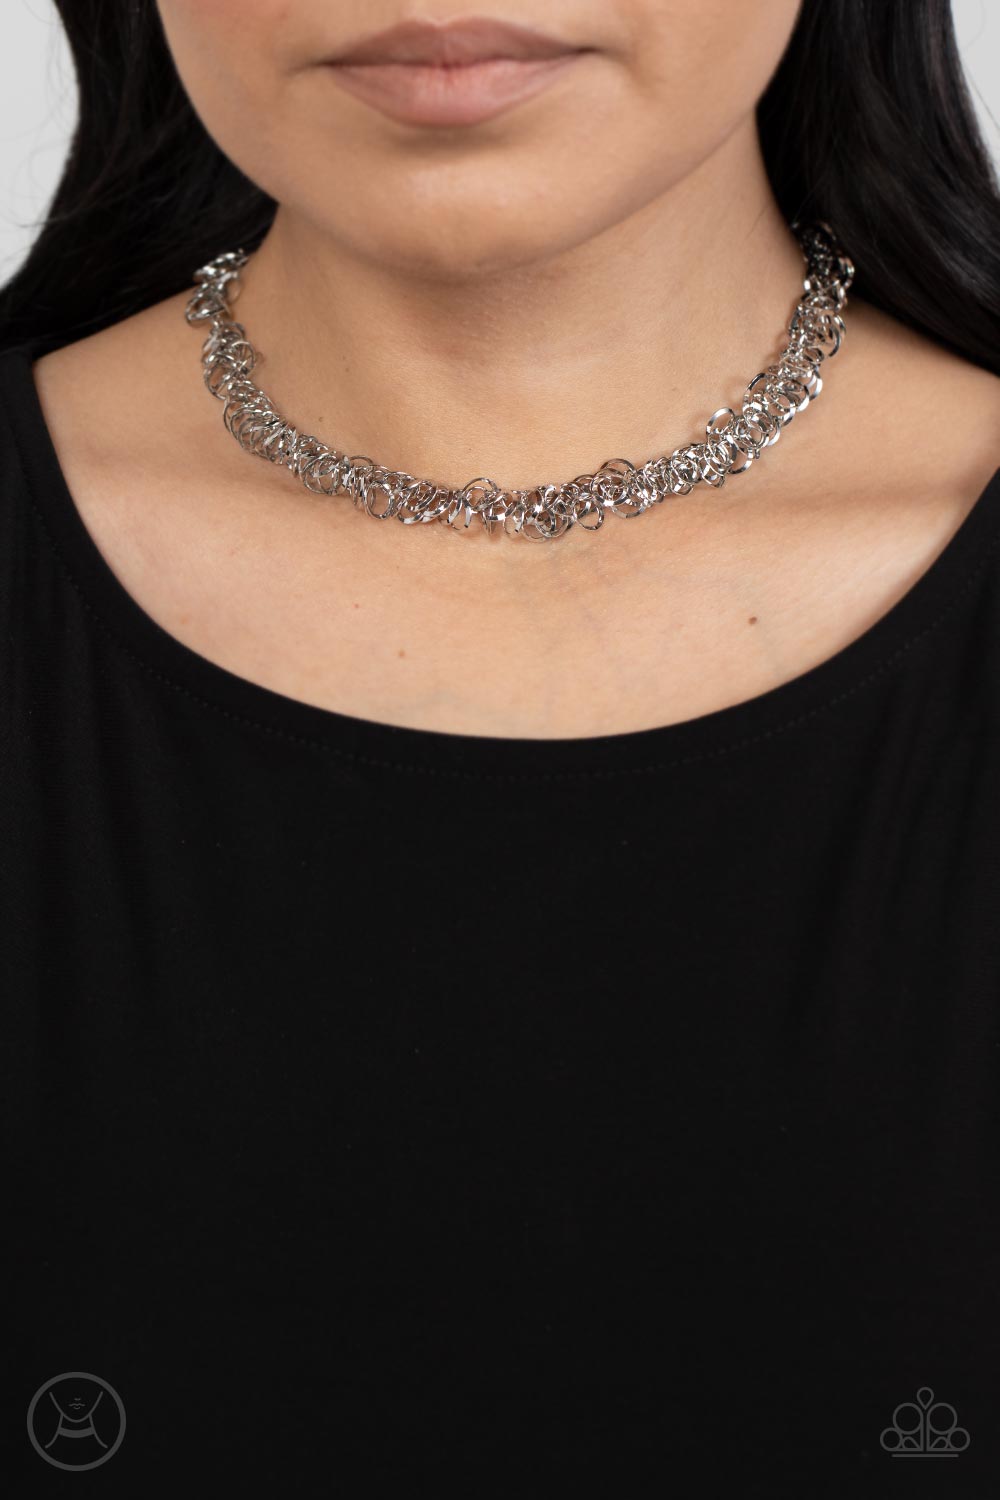 Cause a Commotion Silver Choker Necklace